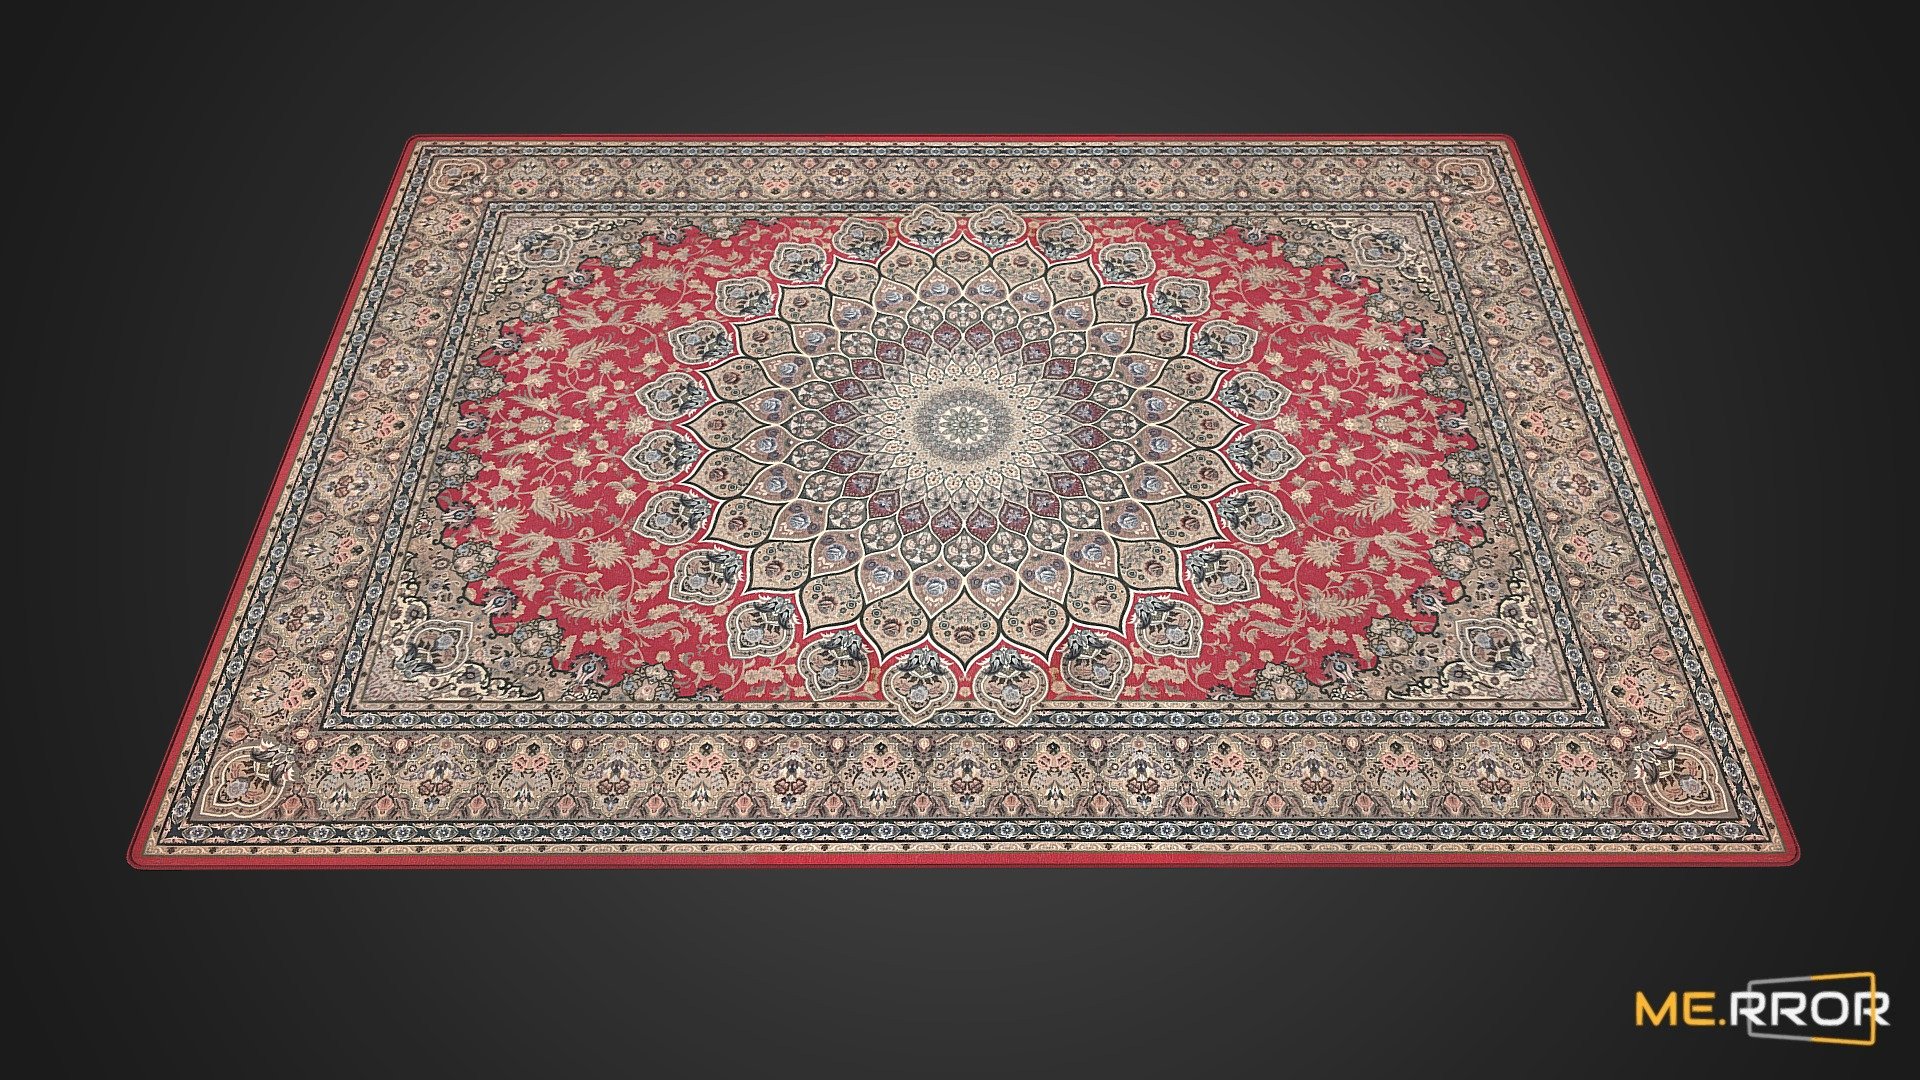 MERROR is a 3D Content PLATFORM which introduces various Asian assets to the 3D world


3DScanning #Photogrametry #ME.RROR - [Game-Ready] Persian Carpet - Buy Royalty Free 3D model by ME.RROR (@merror) 3d model